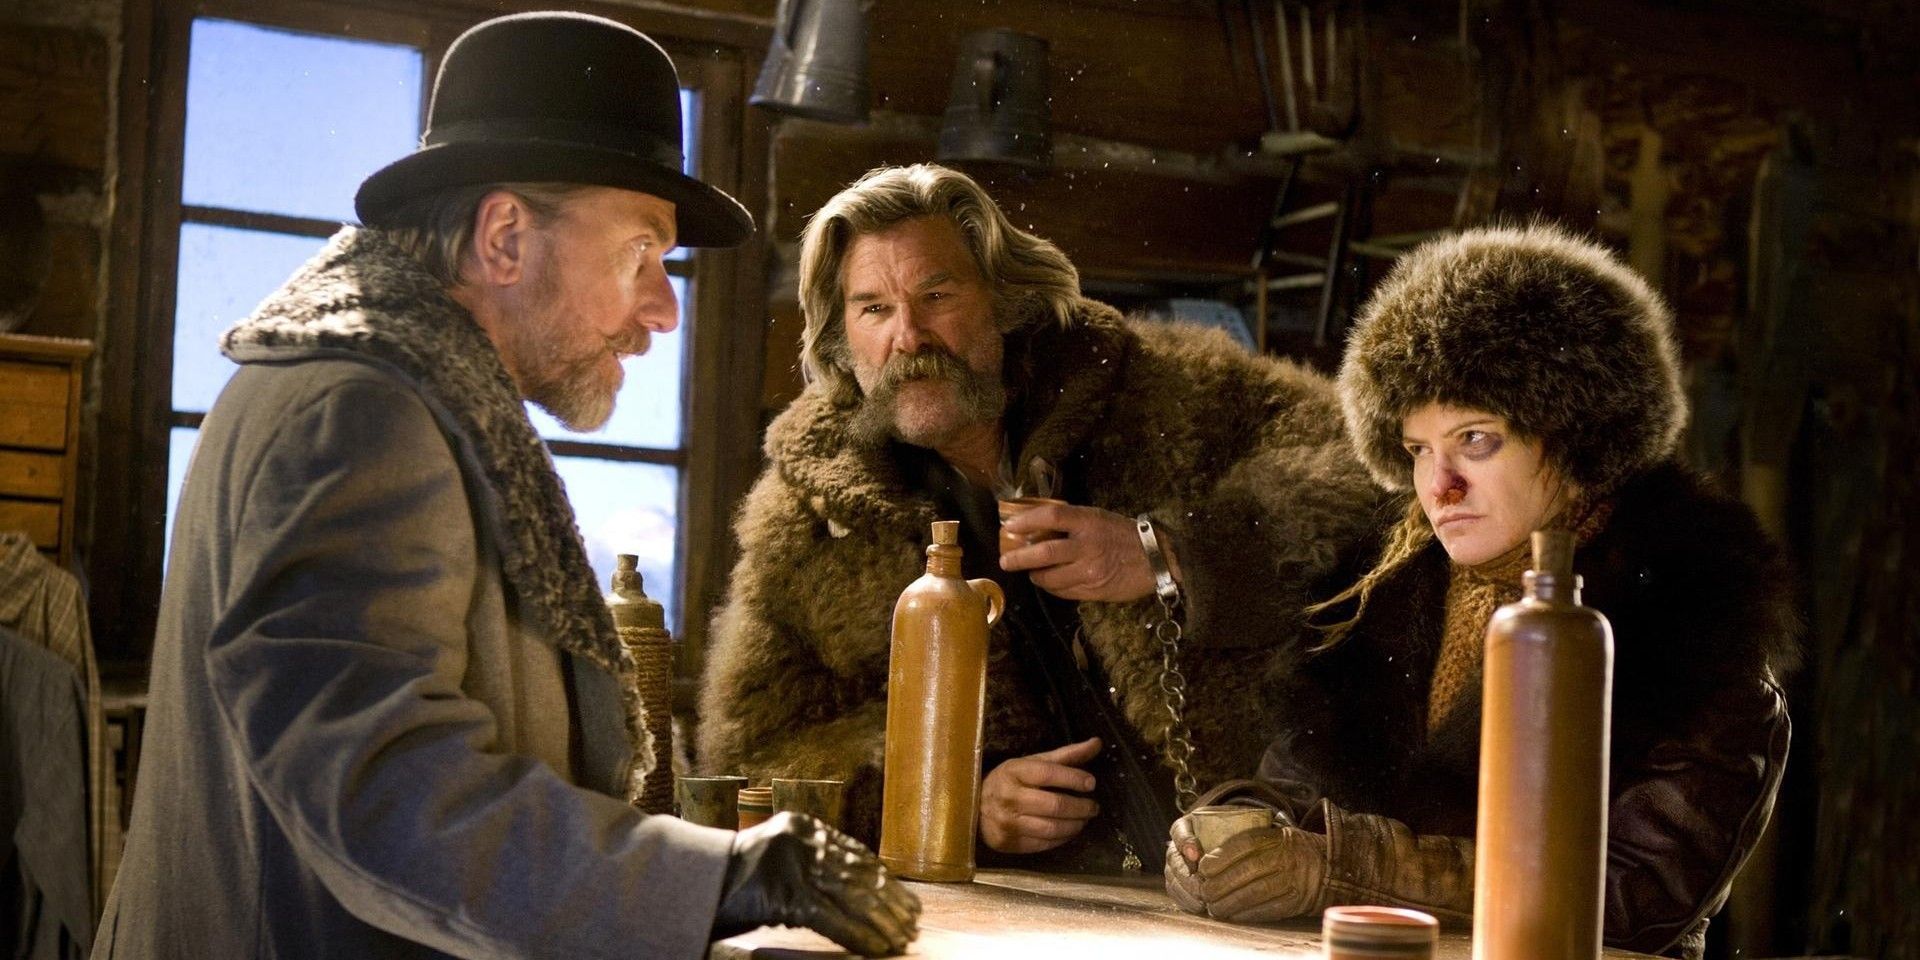 Mobray speaking with Daisy in The Hateful Eight